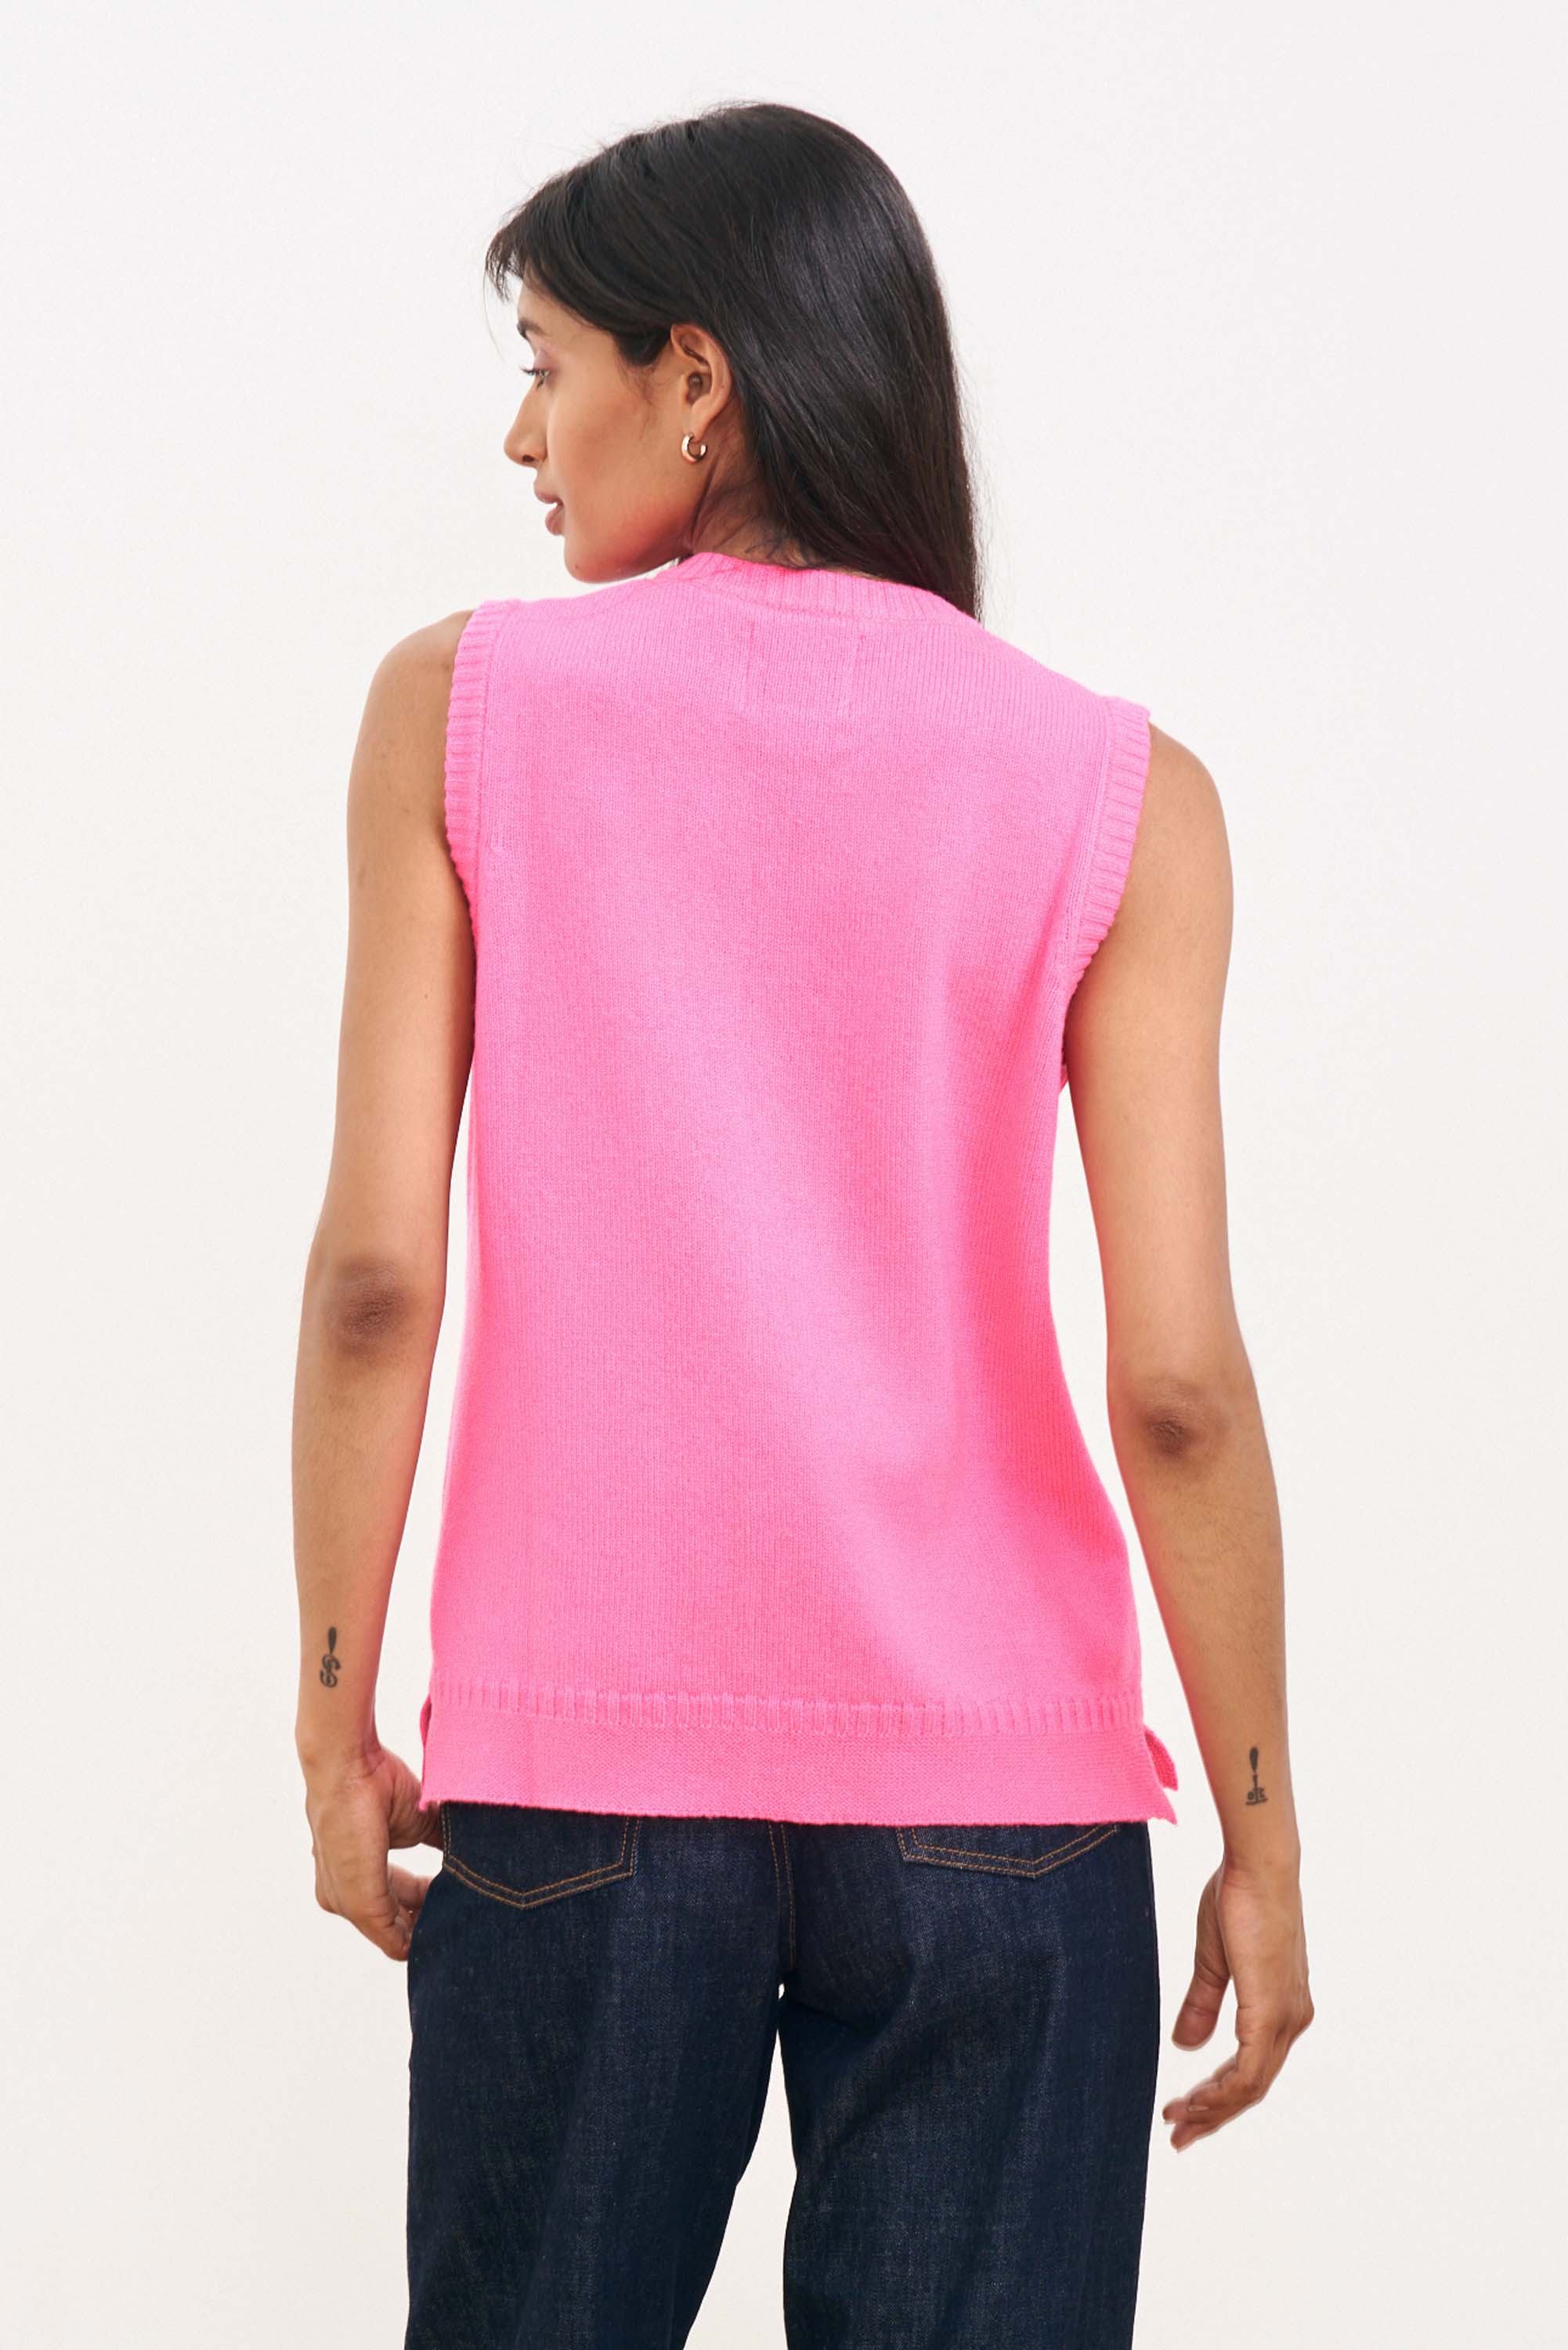 Brown haired female model wearing Jumper1234 neon pink cashmere sleeveless guernsey cardigan facing away from the camera